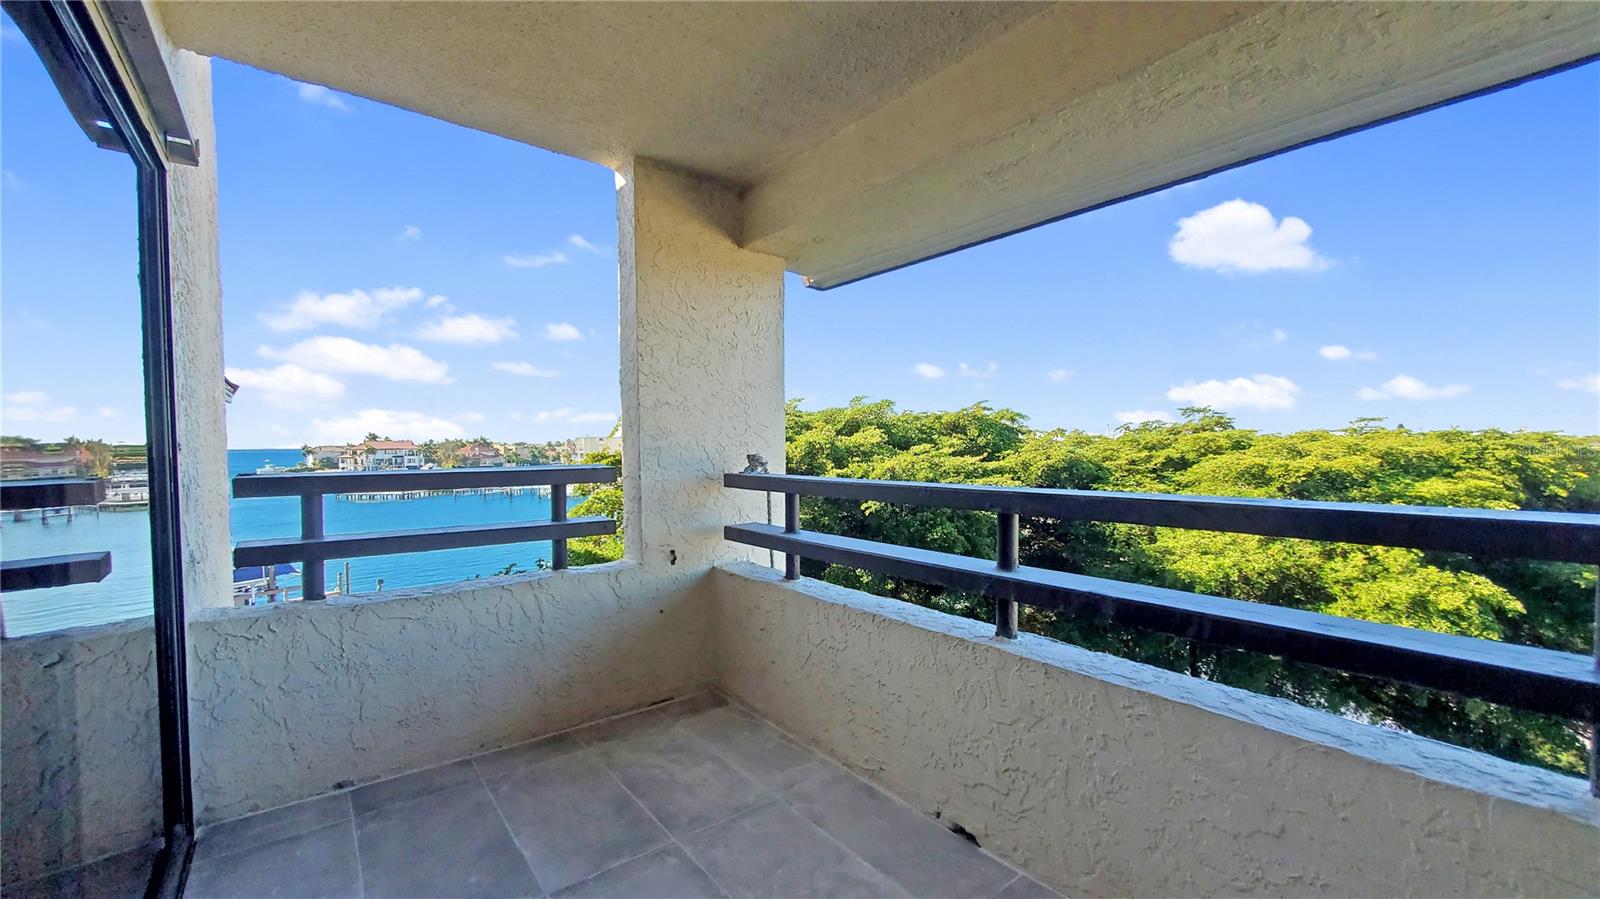 Water views from your balcony!!106 1ST ST E, #311, TIERRA VERDE, FL 33715